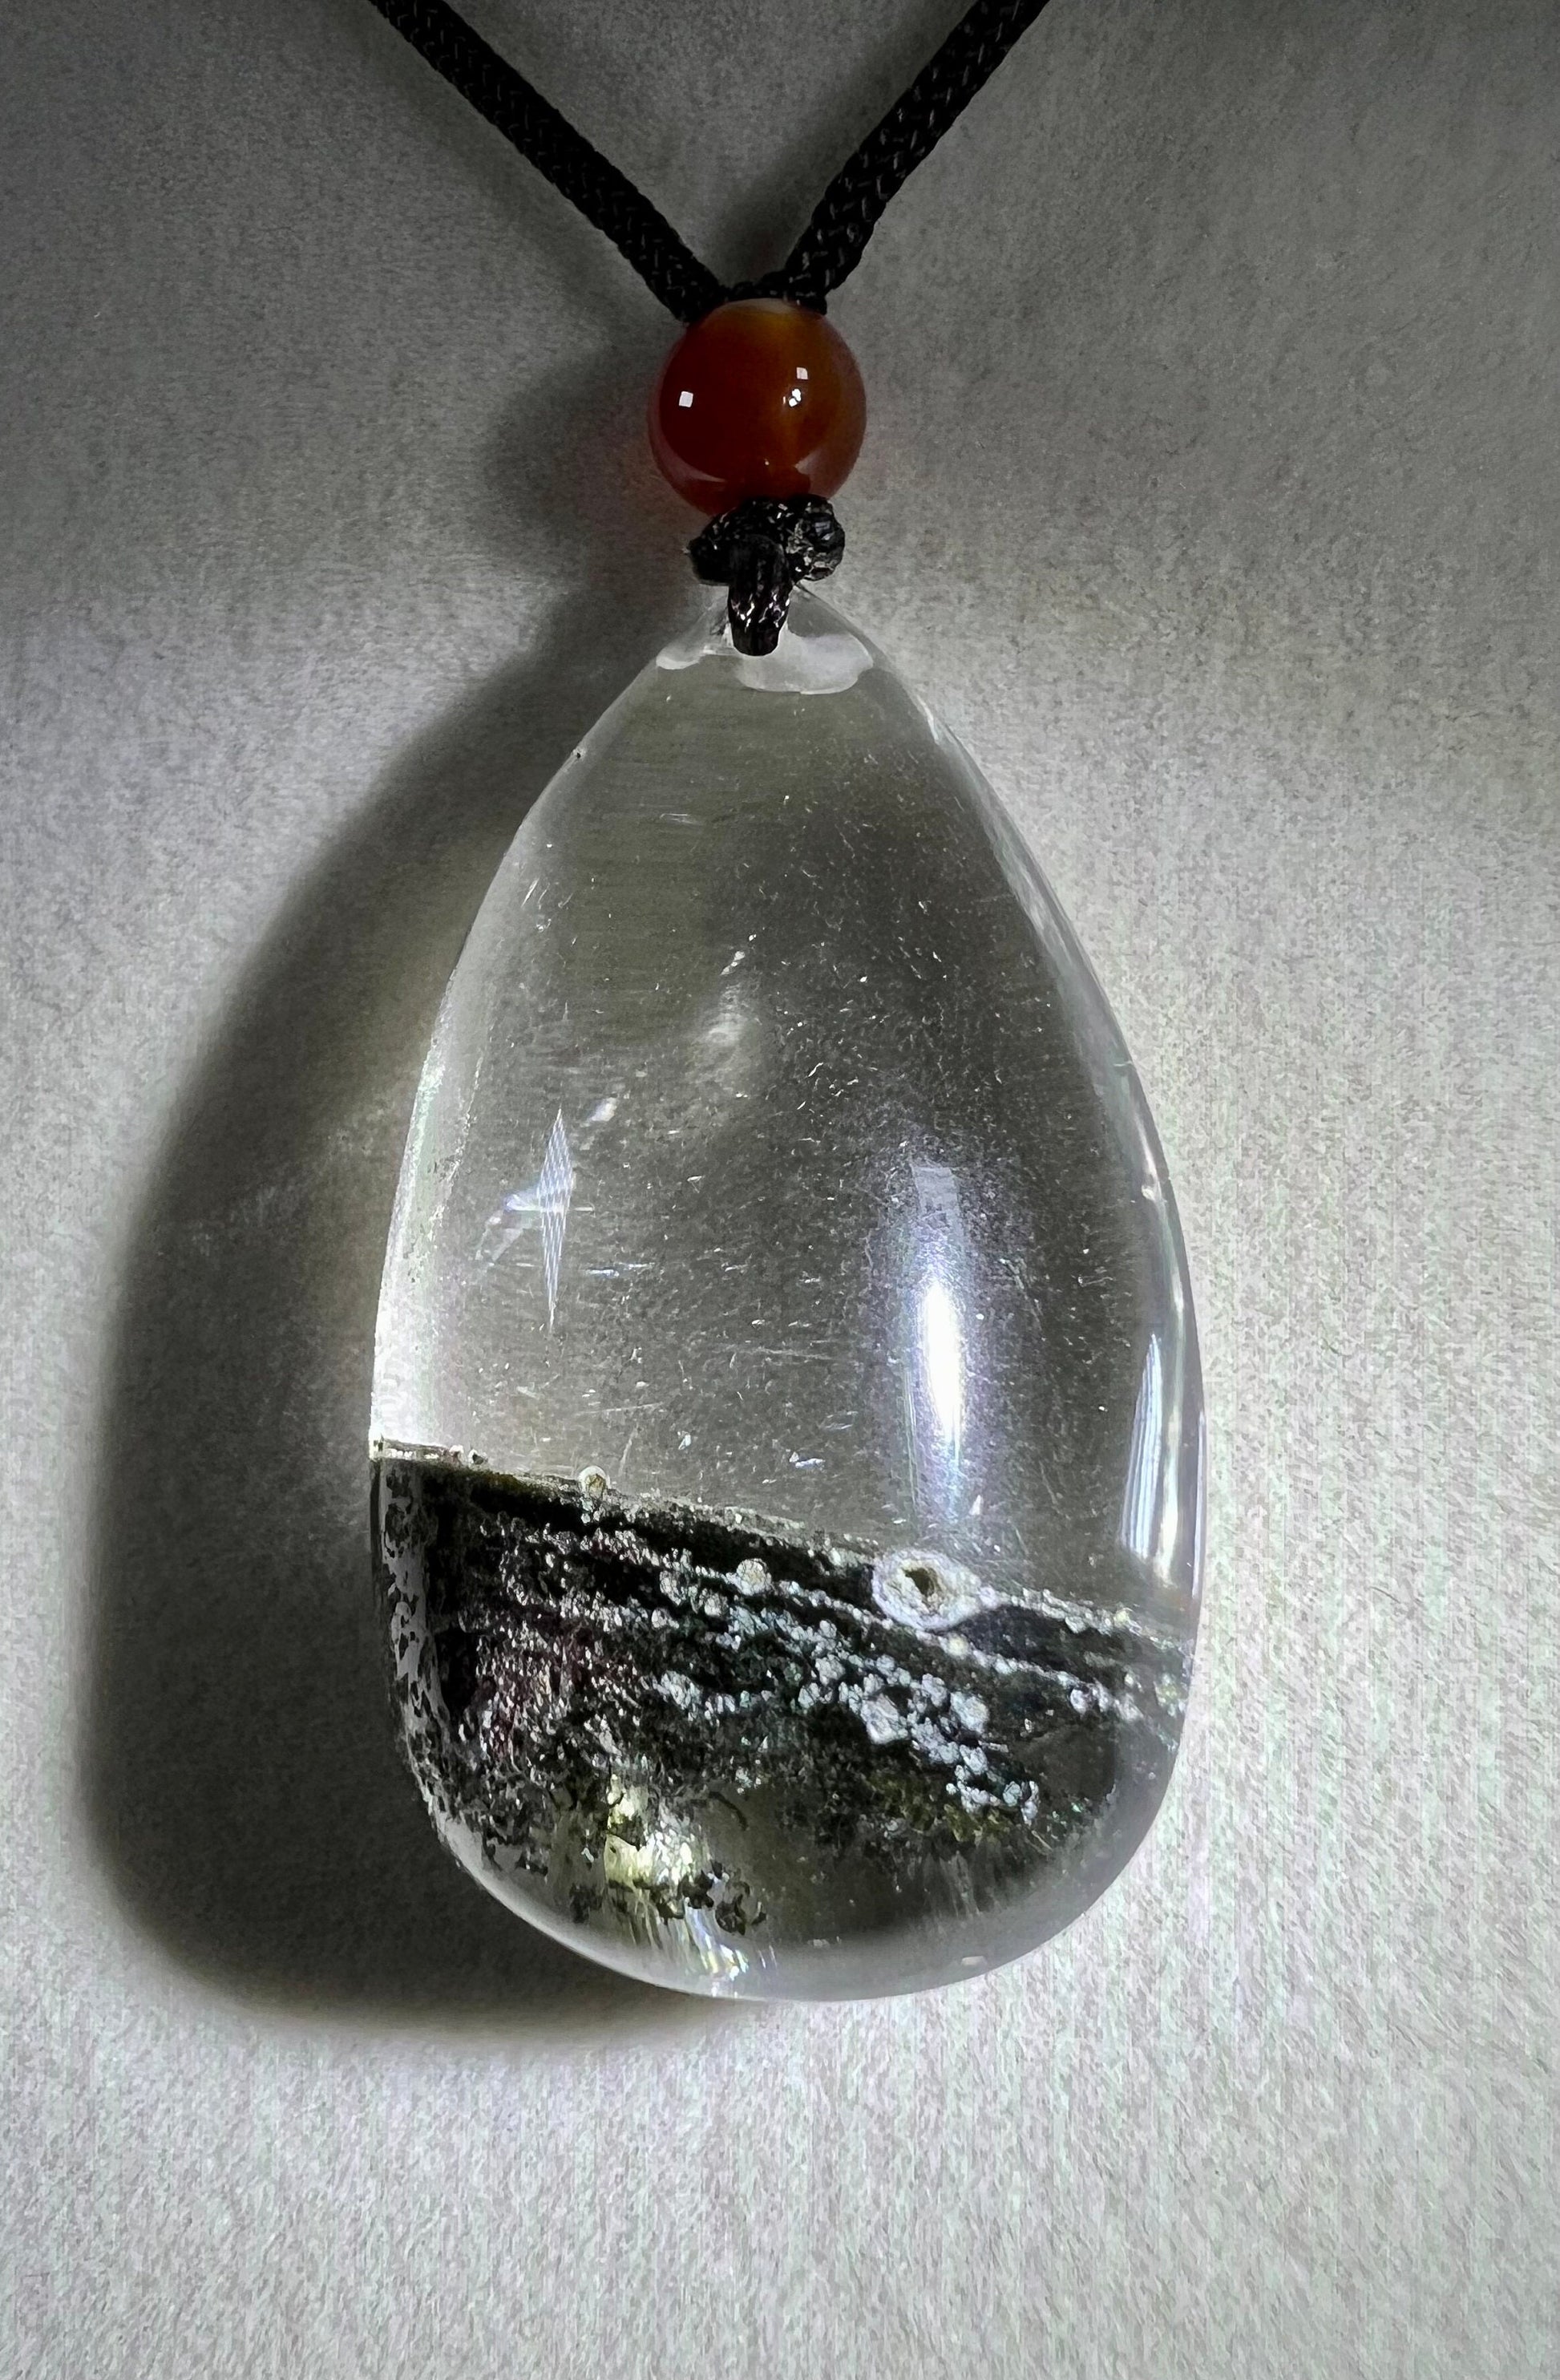 Beautiful Thousand Layer Garden Quartz Pendant. Stunning Teardrop Crystal Necklace With Cool Layers.